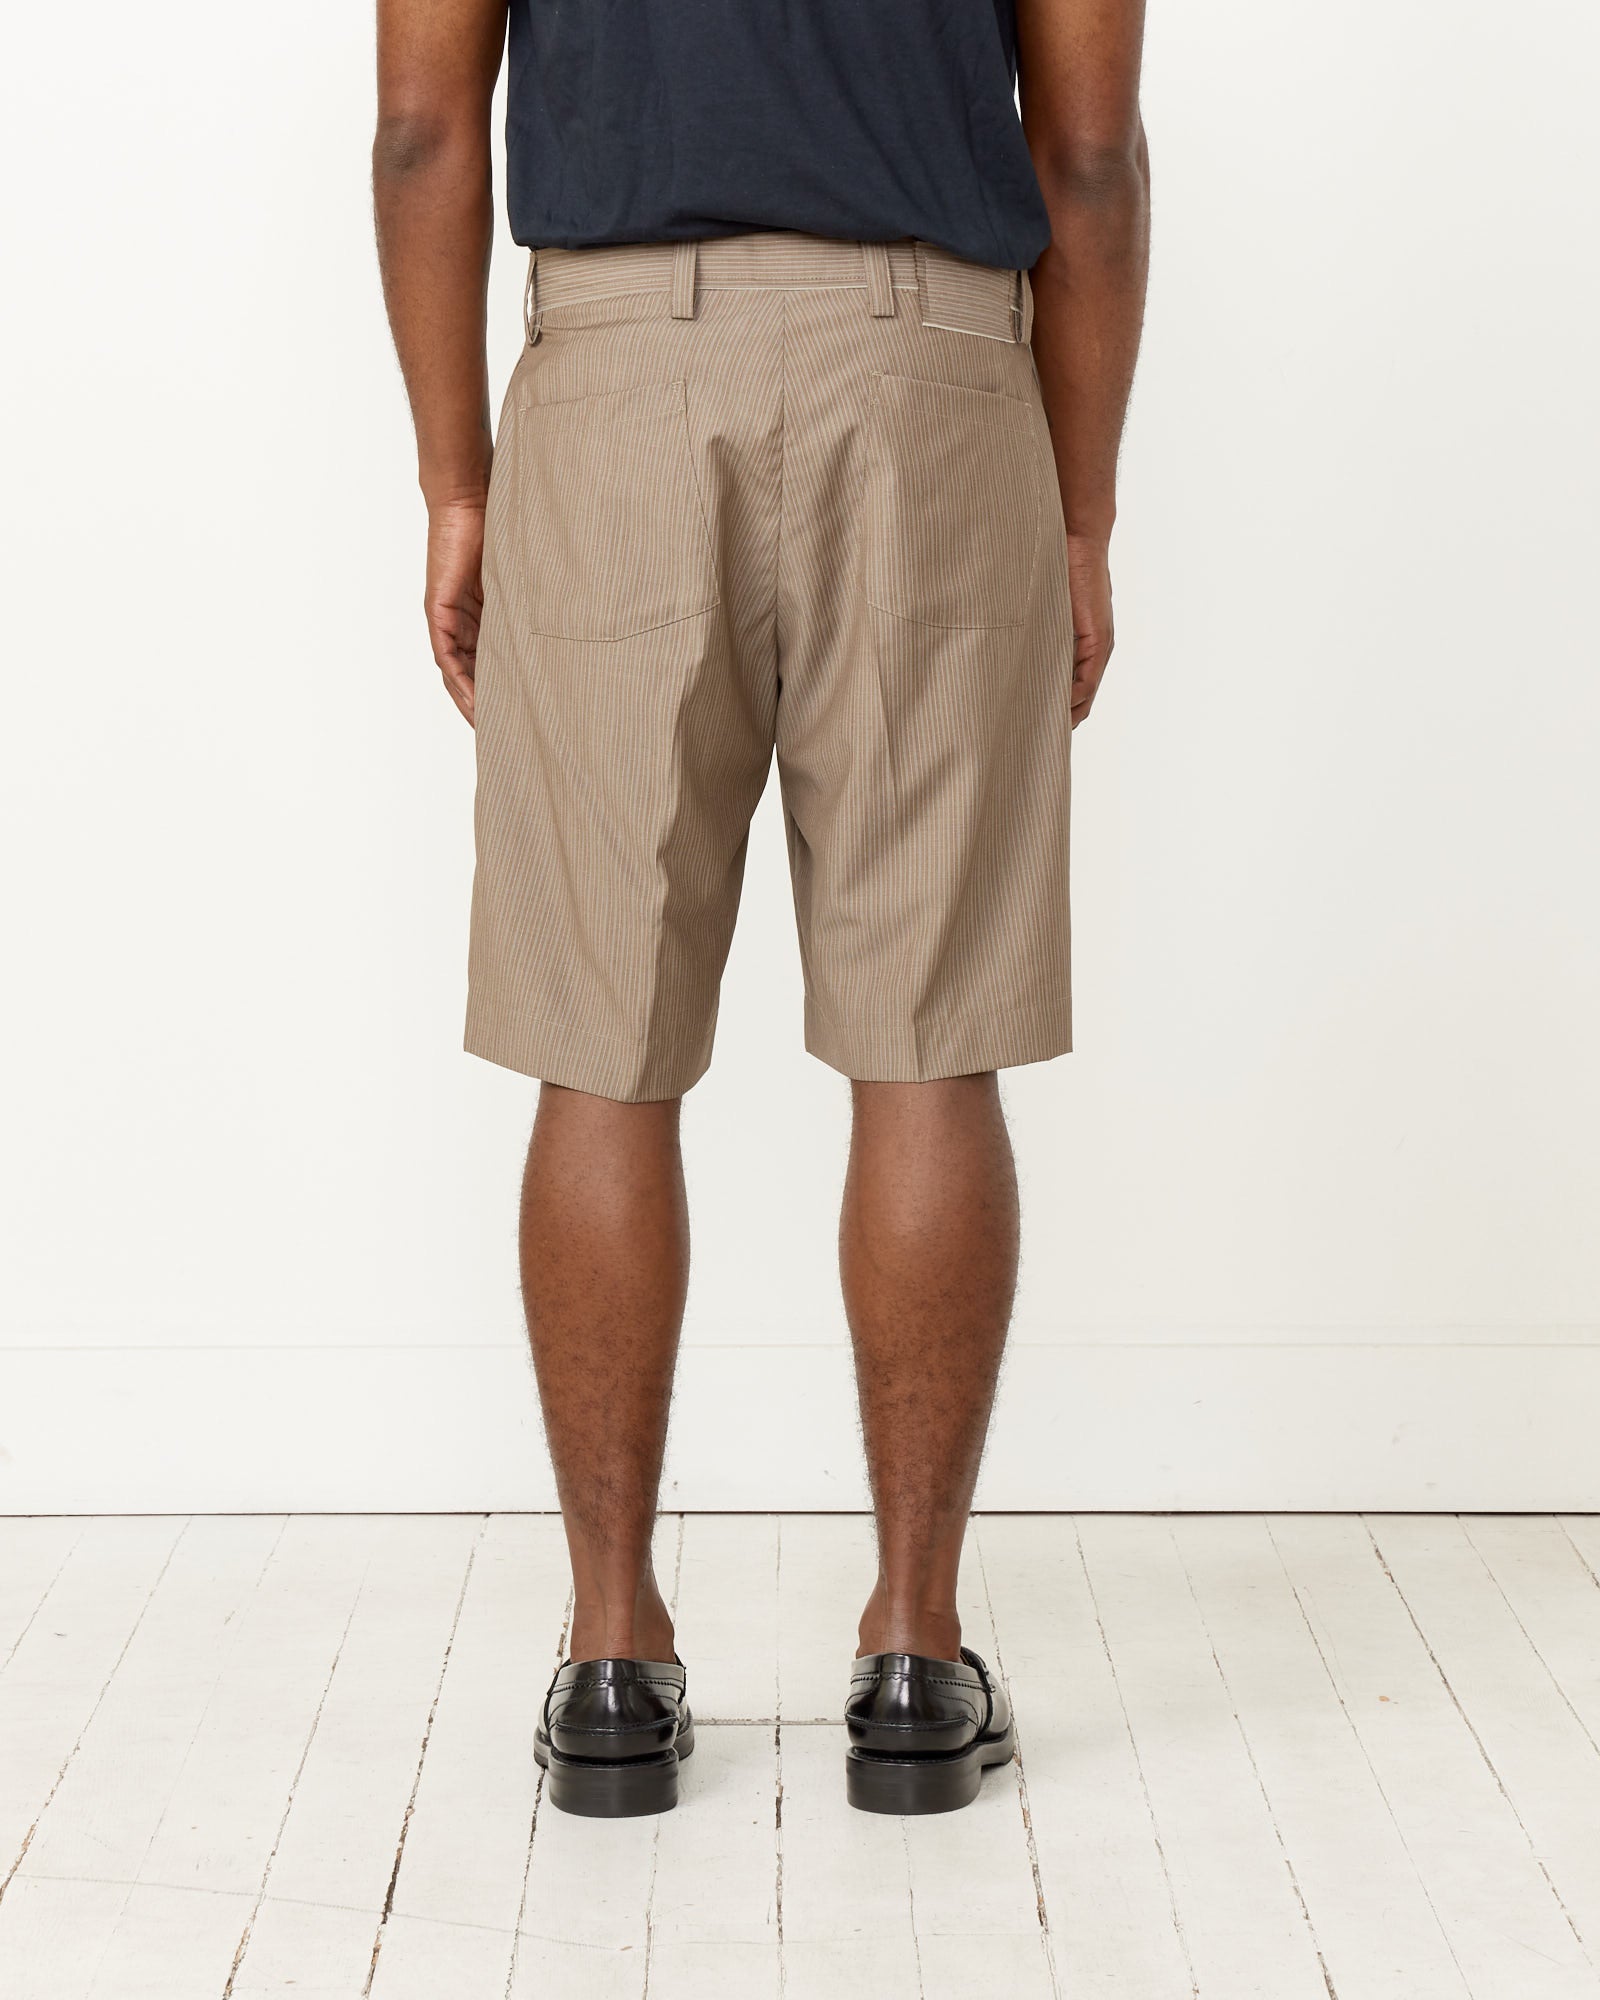 Classic Shorts in Taupe Grey